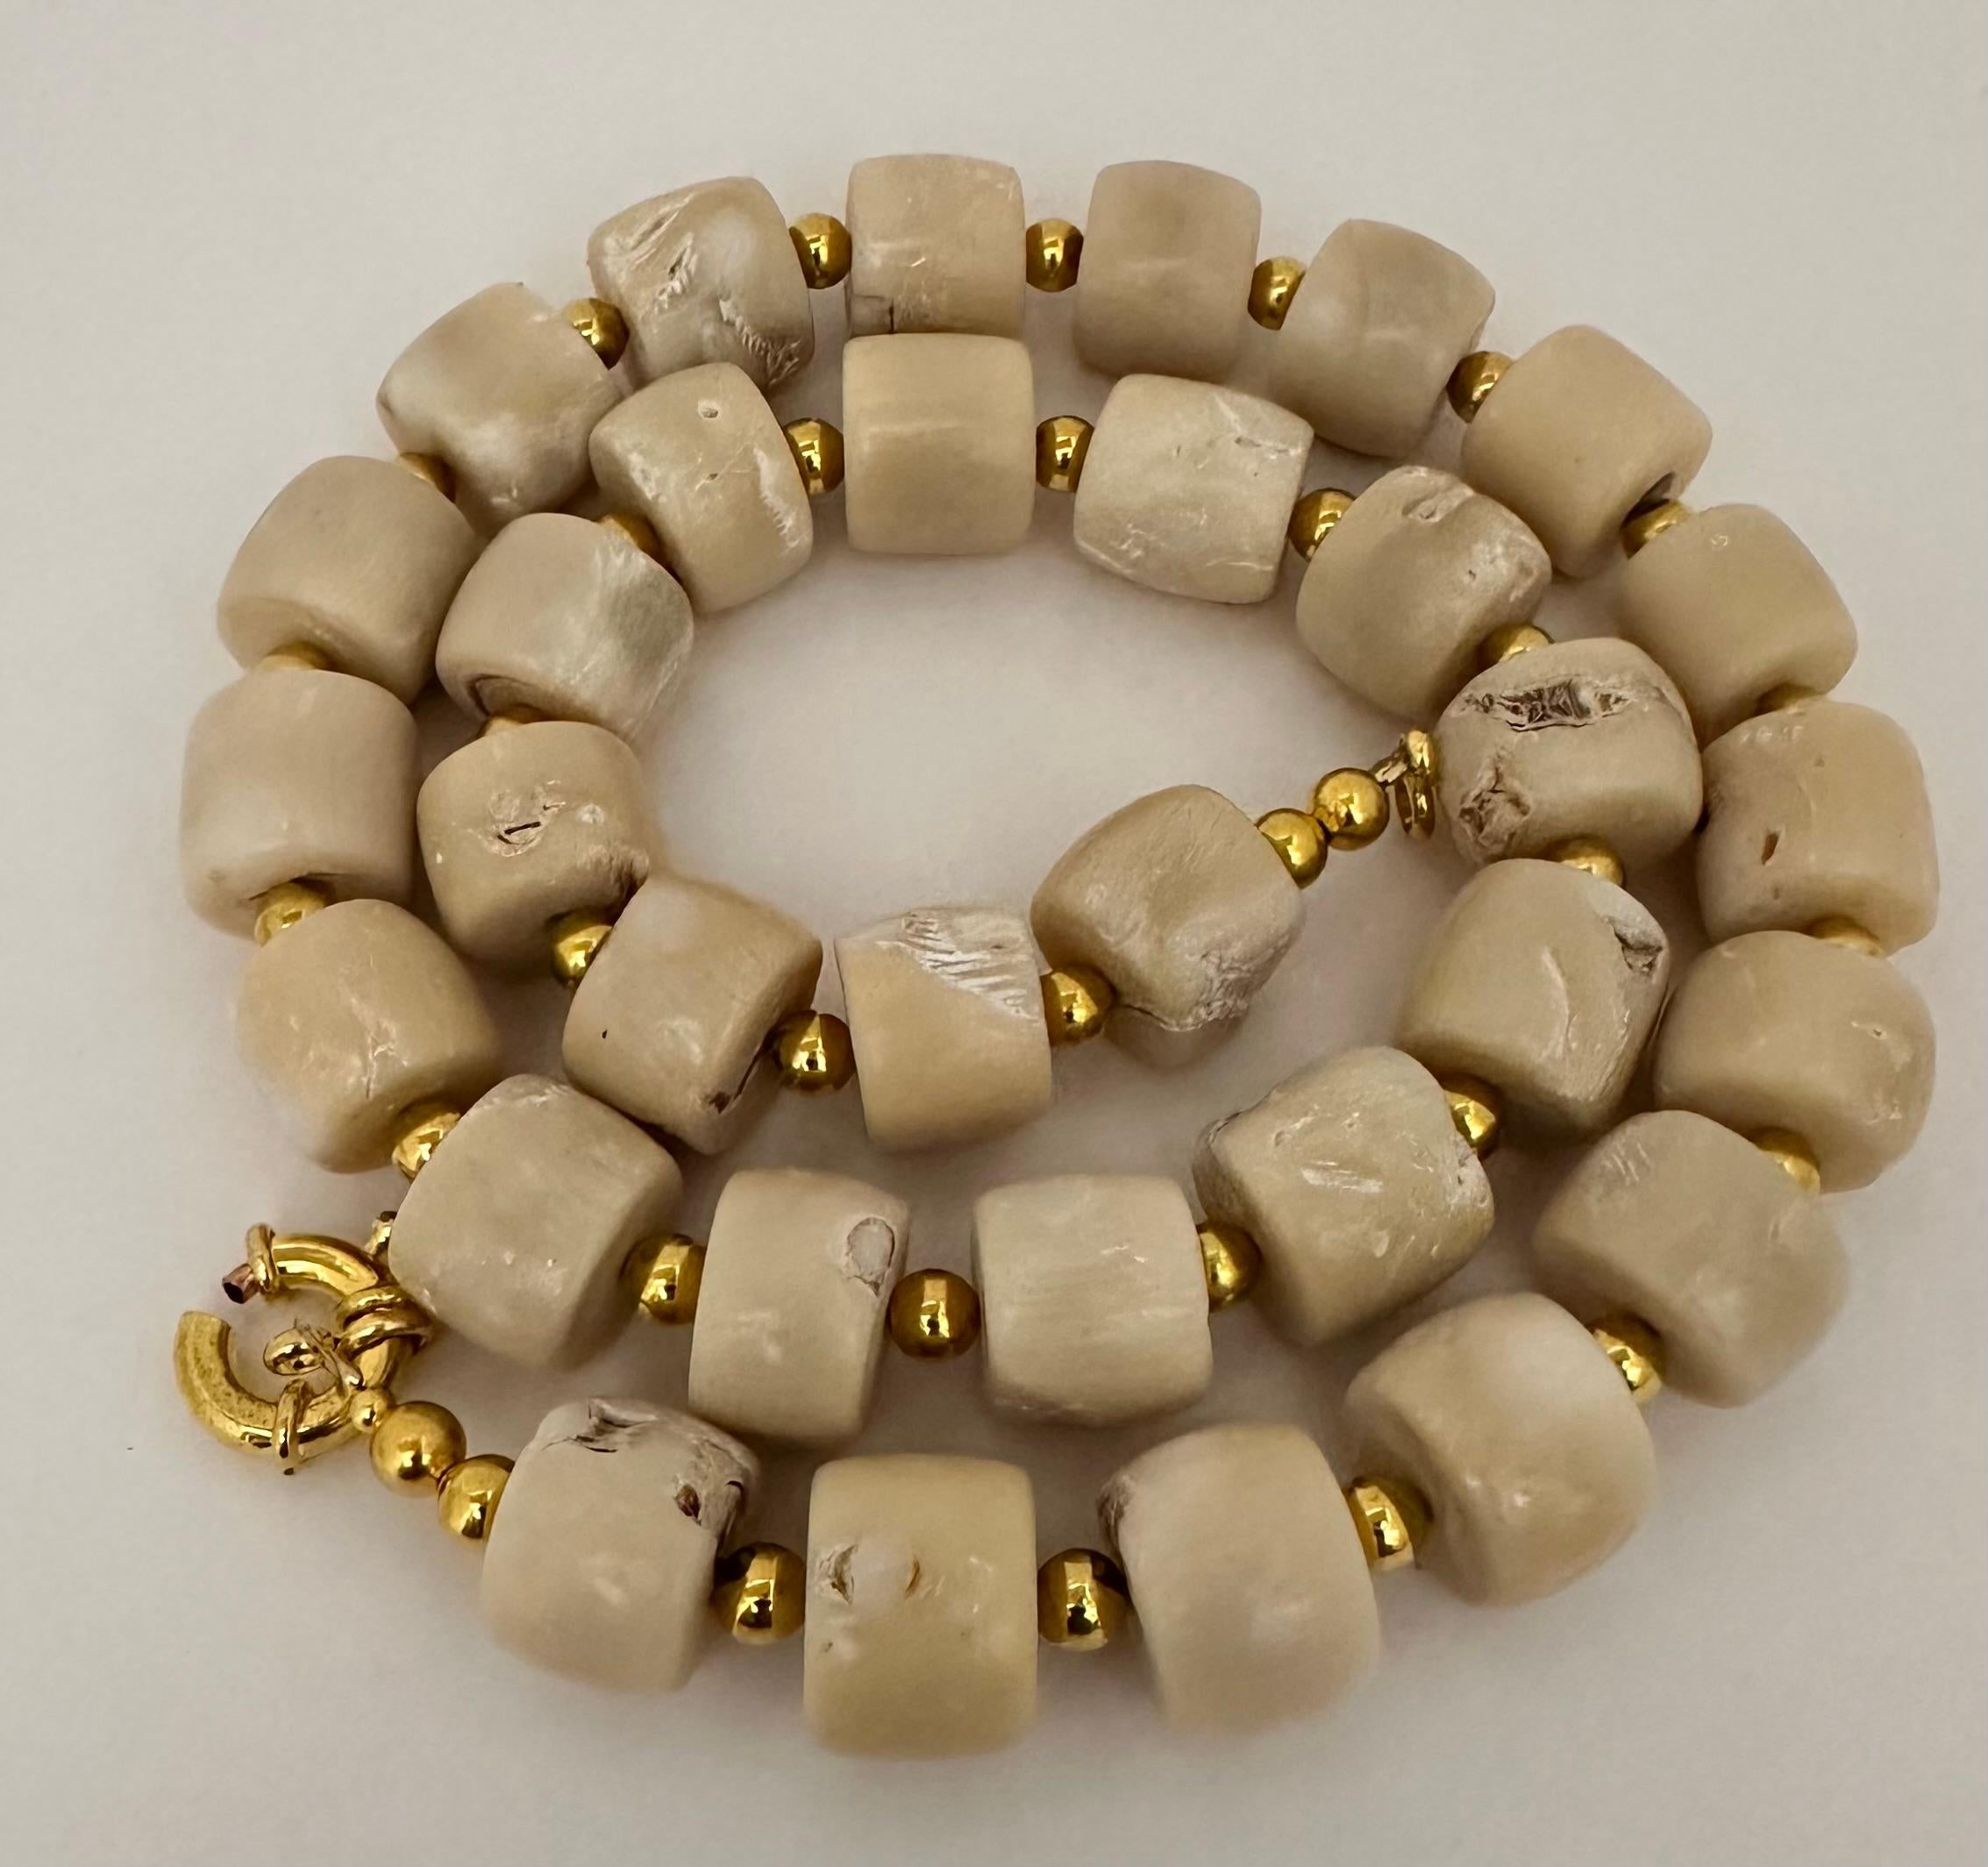 Handmade Gold and White Barrel Shape Coral Beaded 25